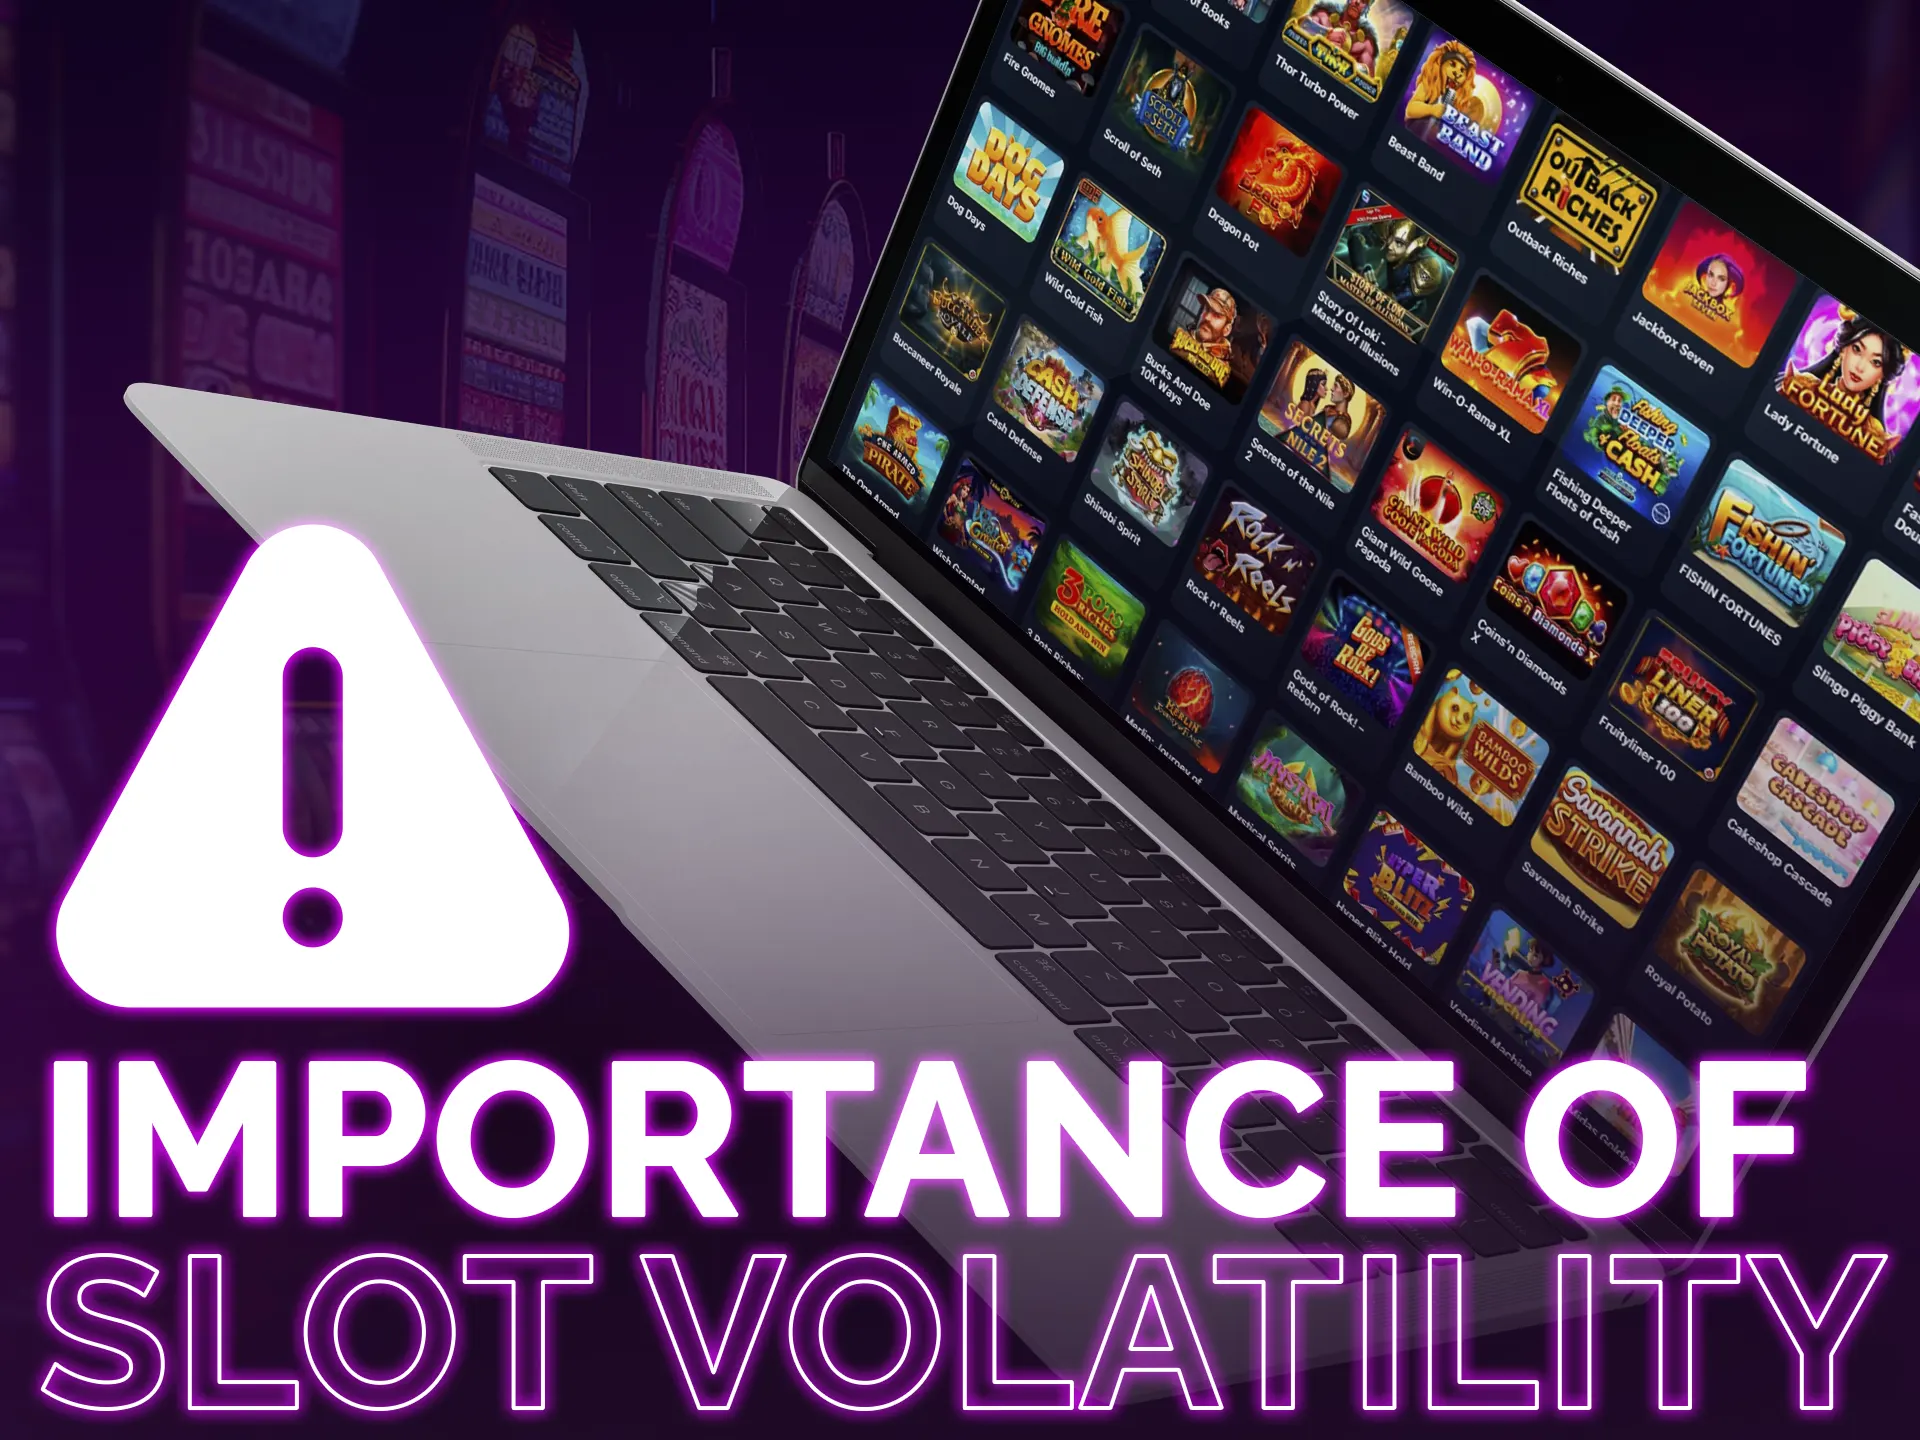 Slot volatility crucial. Choose based on budget, playing style, and preferences.